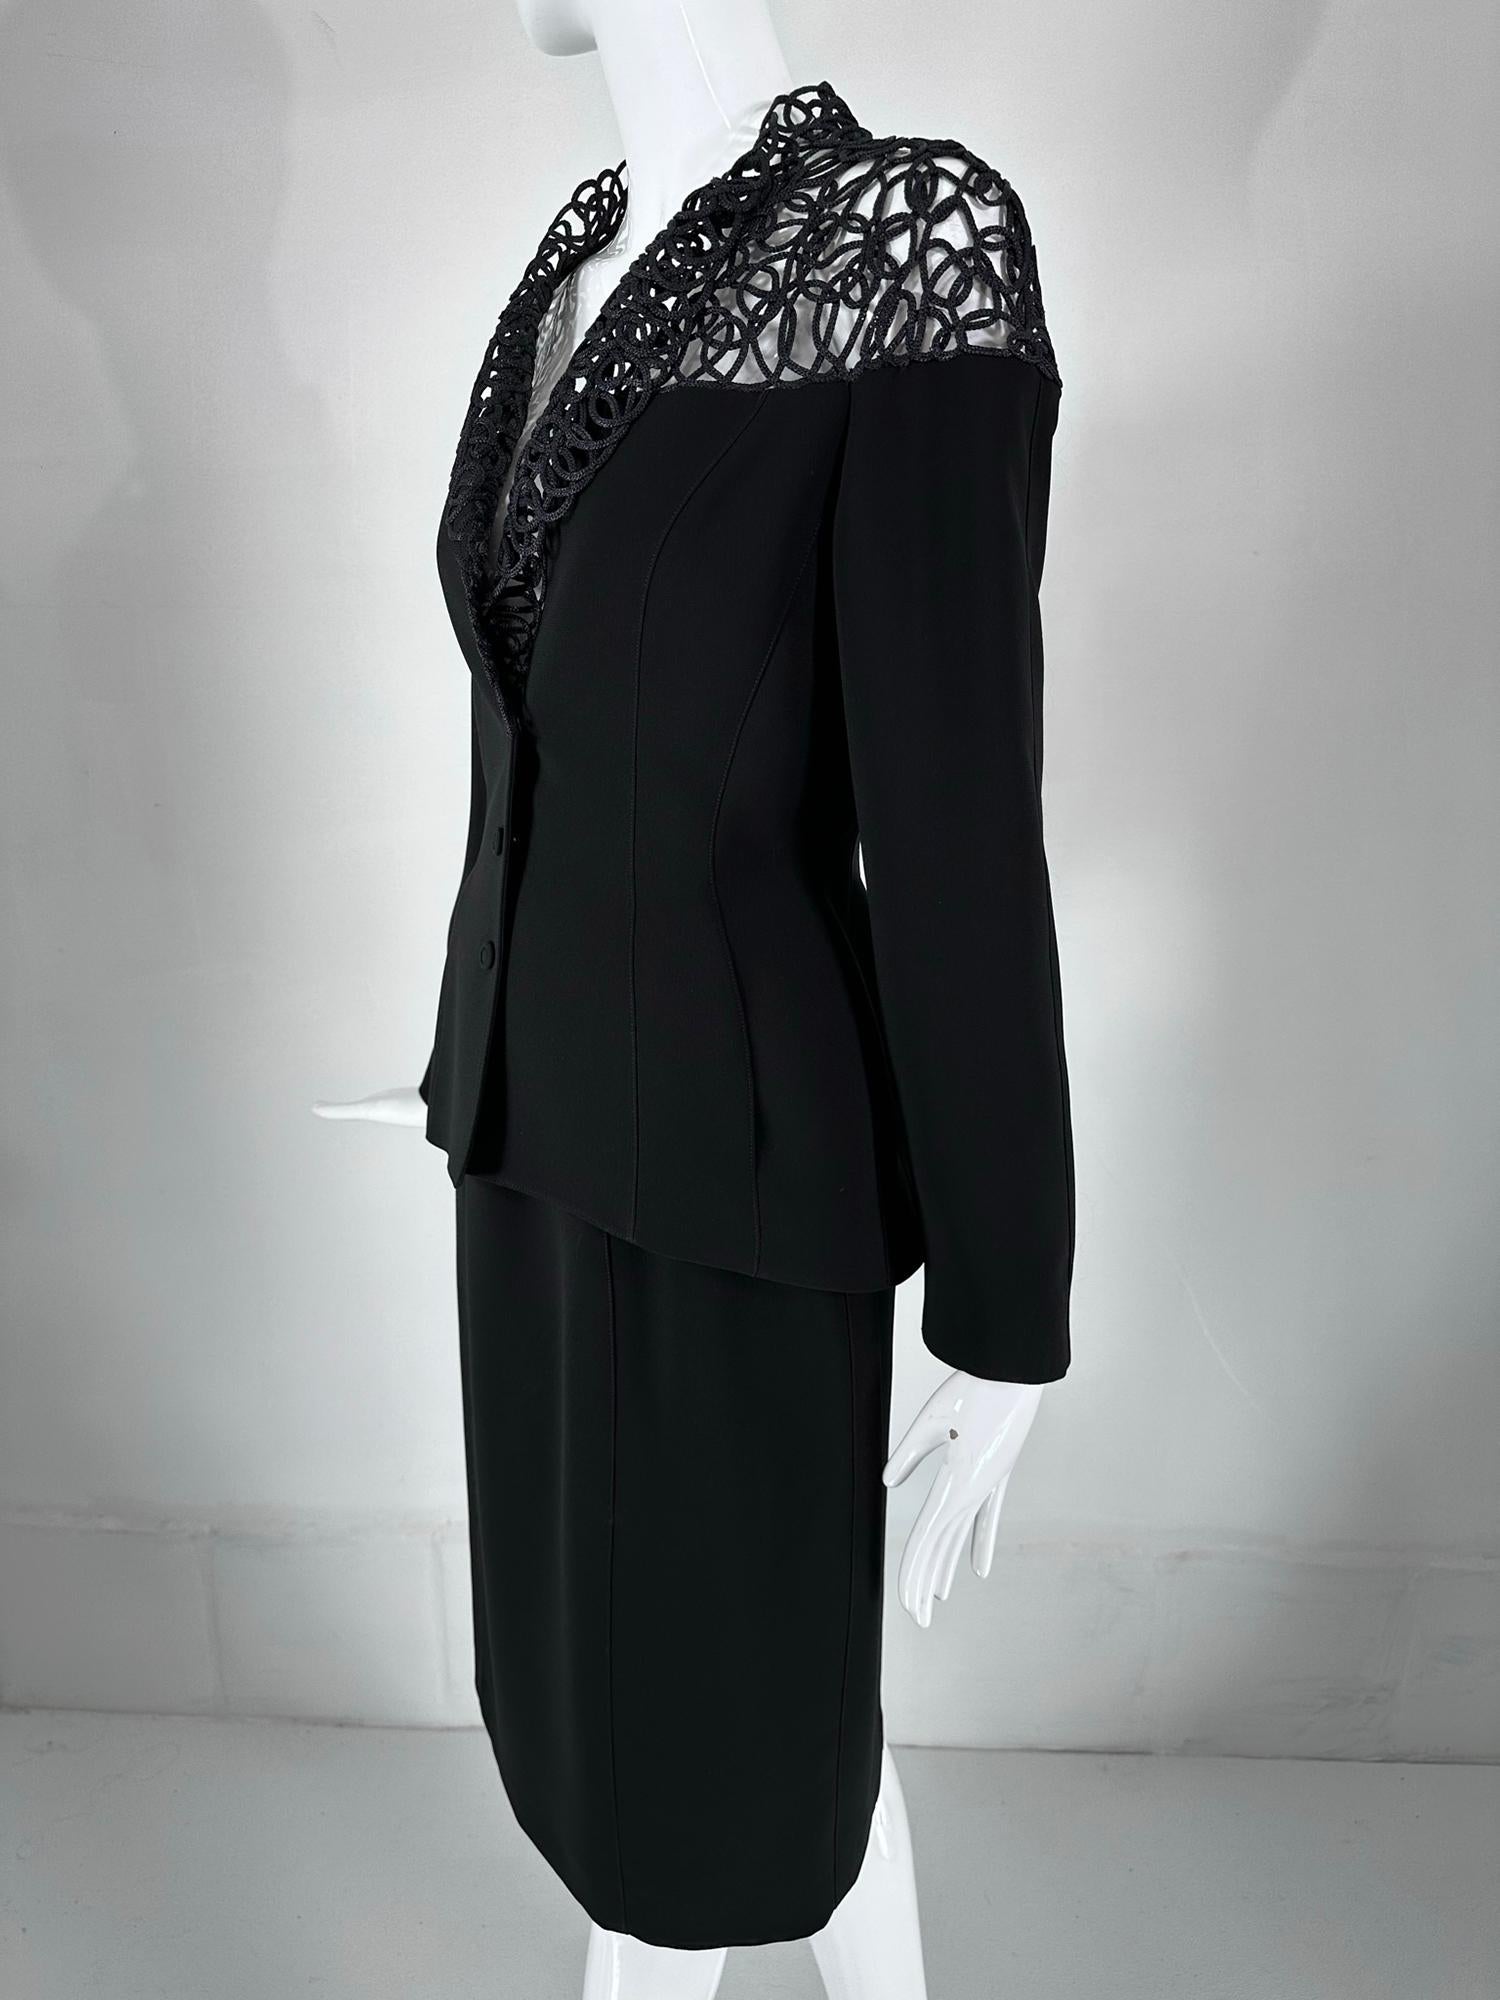 Thierry Mugler Black Cord Lace Hourglass Jacket & Skirt Set  1980s  40 For Sale 4